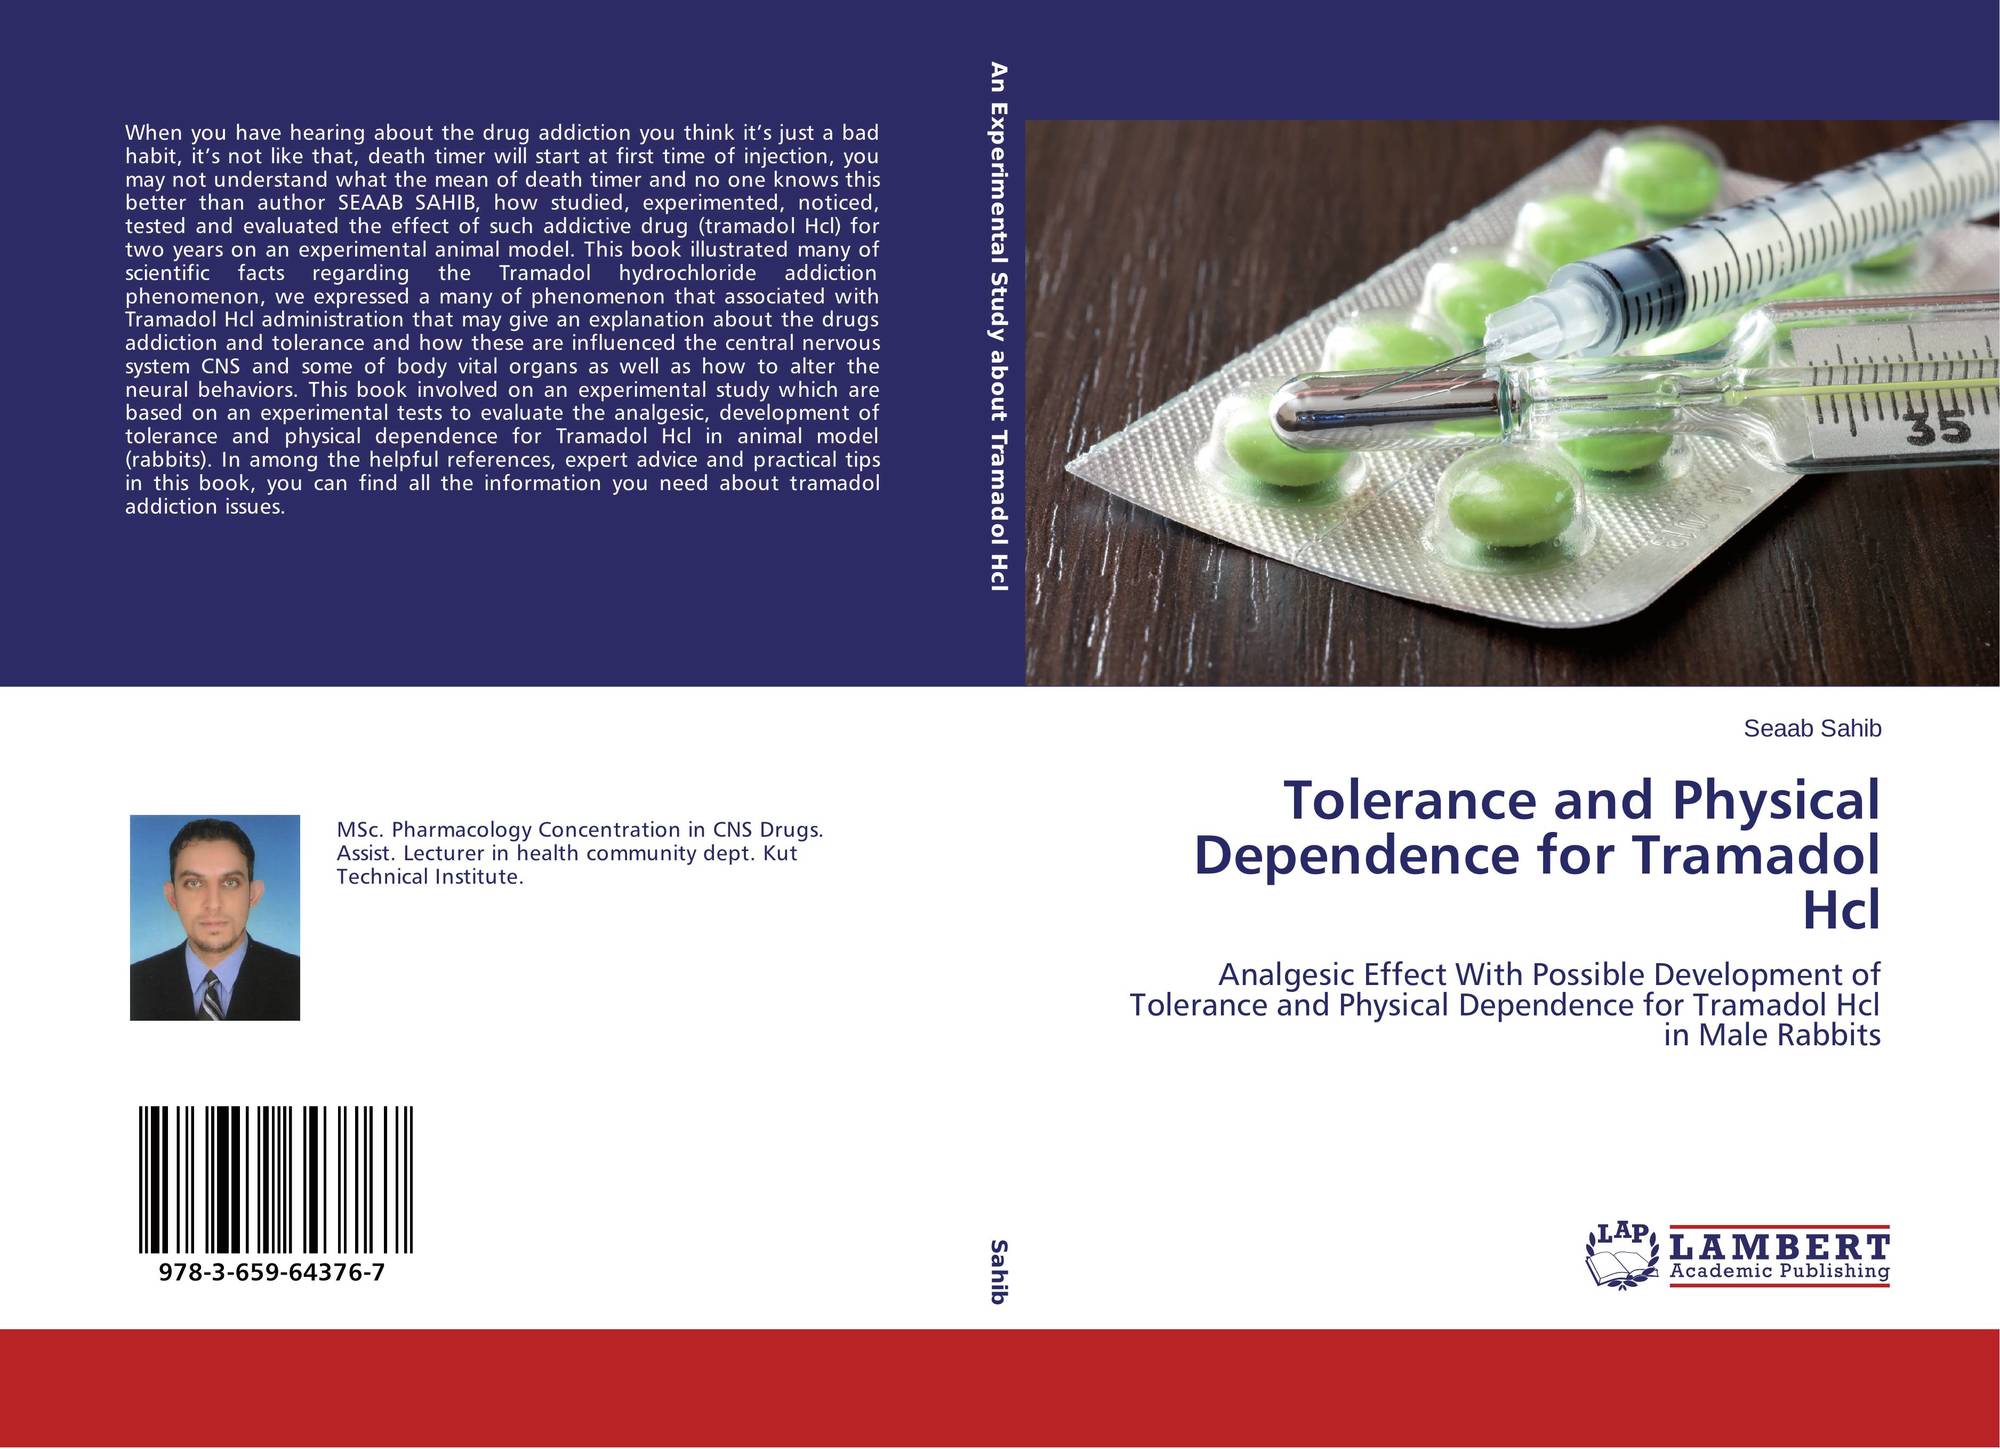 Tolerance And Physical Dependence For Tramadol Hcl 978 3 659 7 By Seaab Sahib